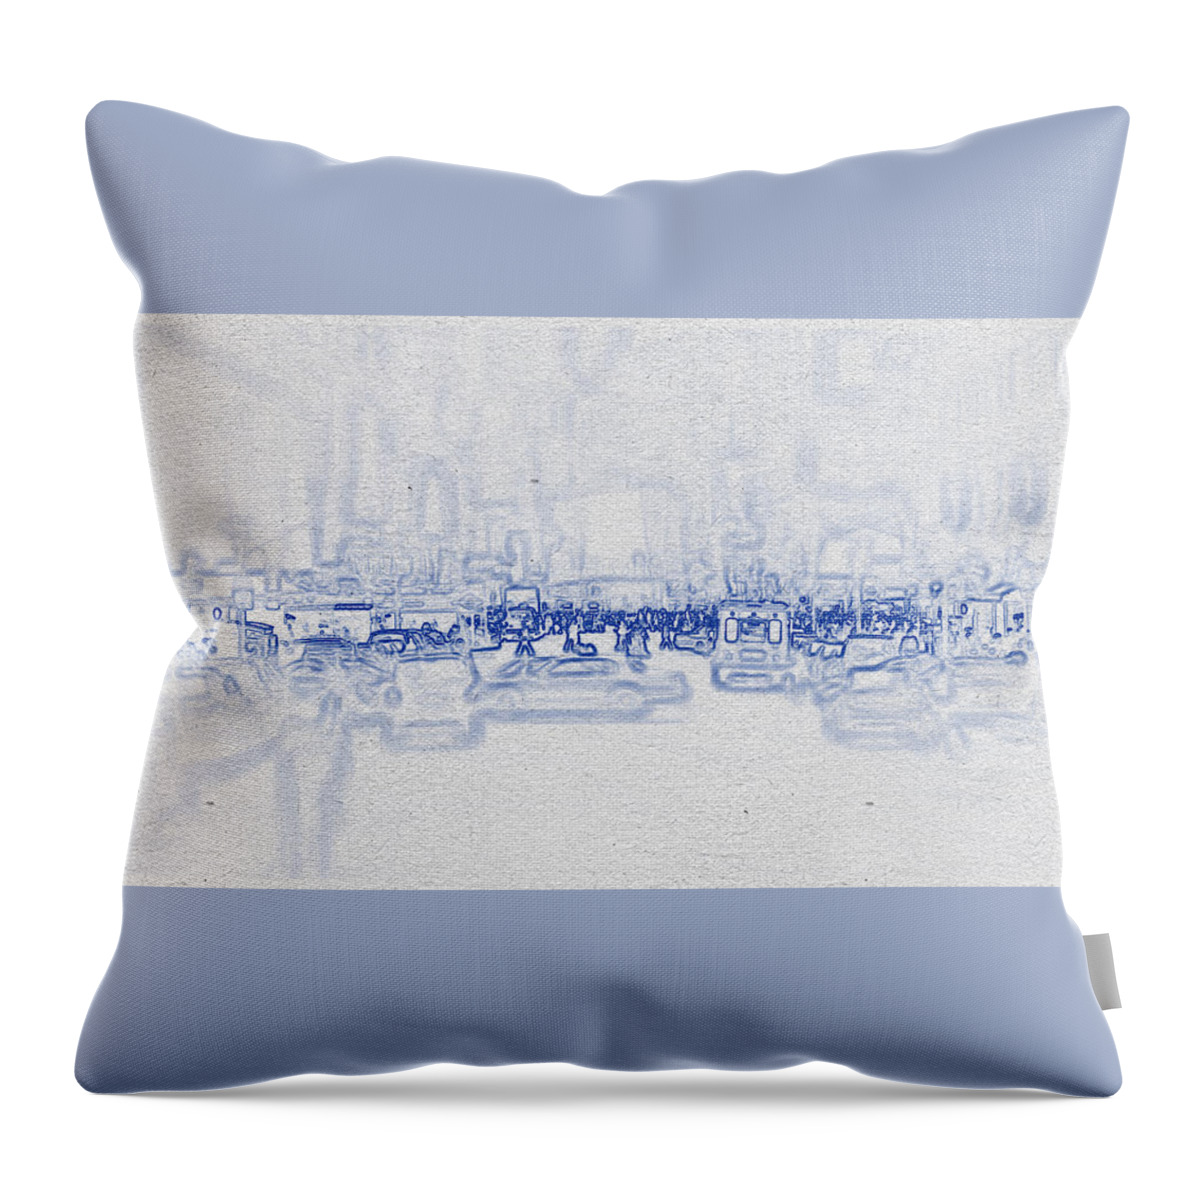 Oil On Canvas Throw Pillow featuring the digital art Blueprint drawing of Cityscape 31 by Celestial Images